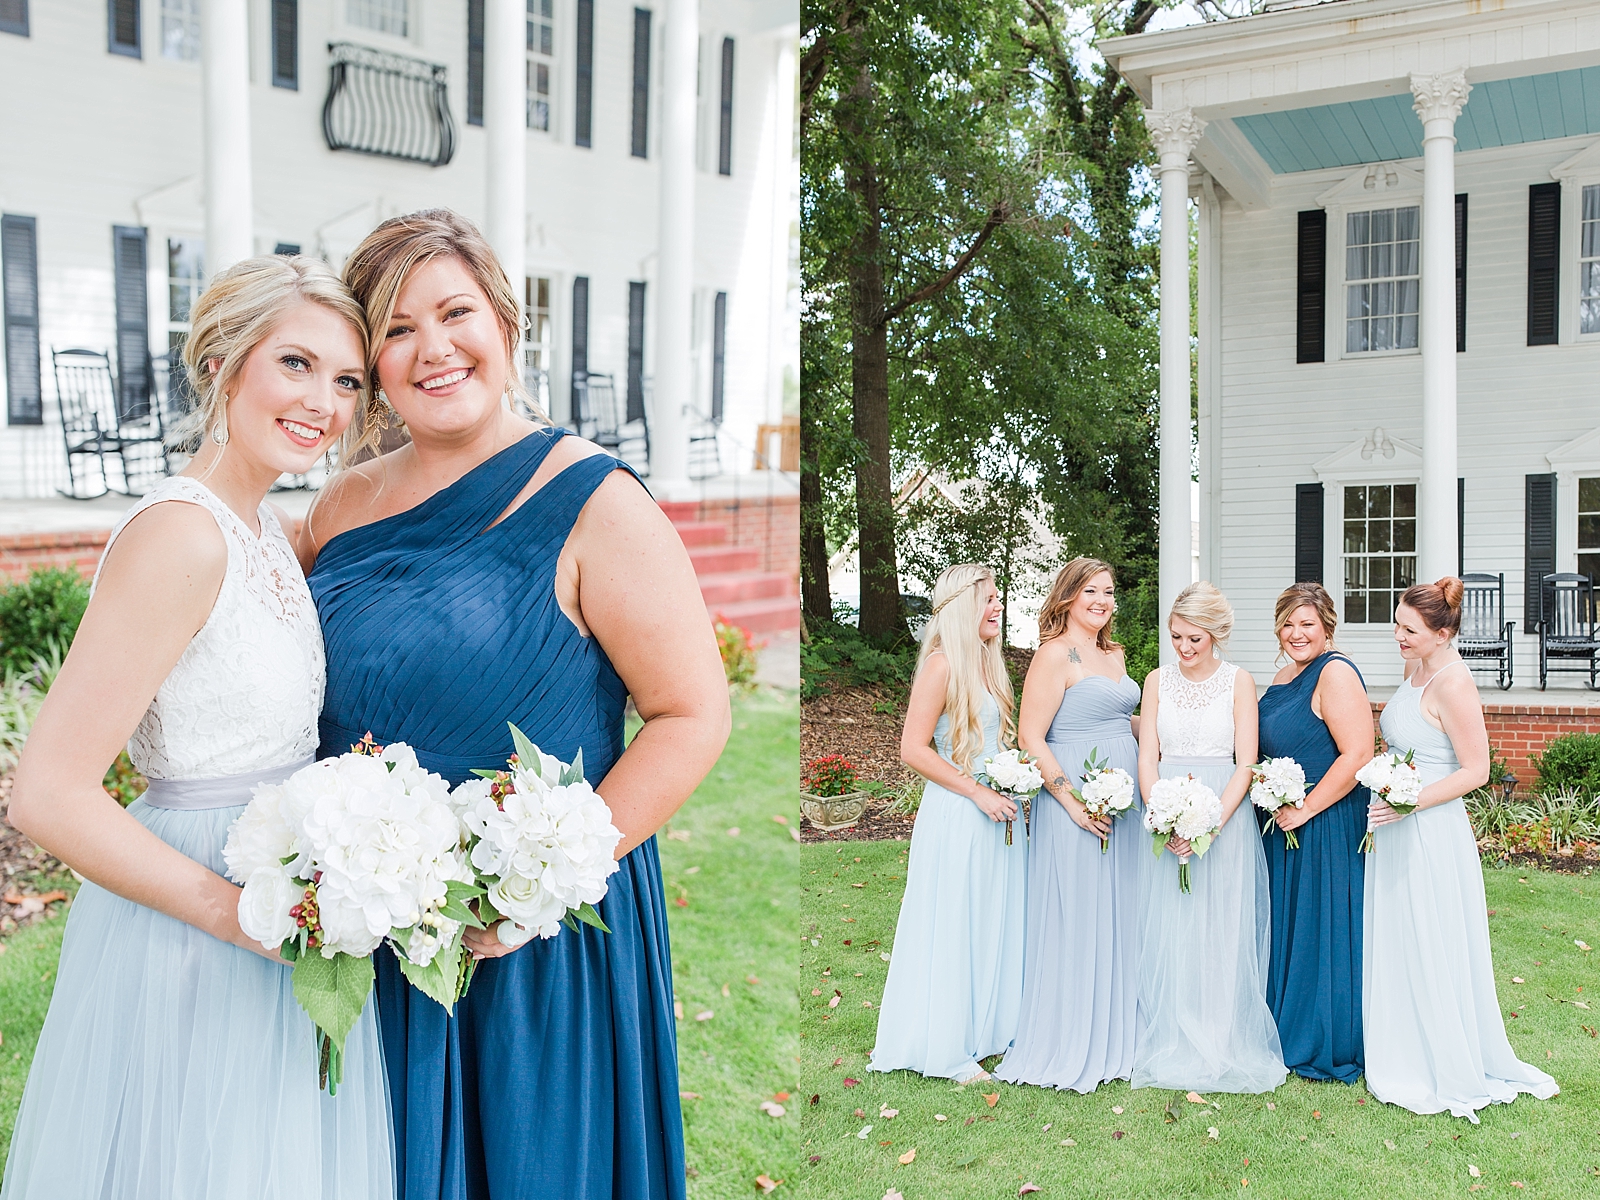 Dahlonega Wedding Venue Bride with Maid of Honor and Bride with Bridesmaids in front of The 1888 House Photos